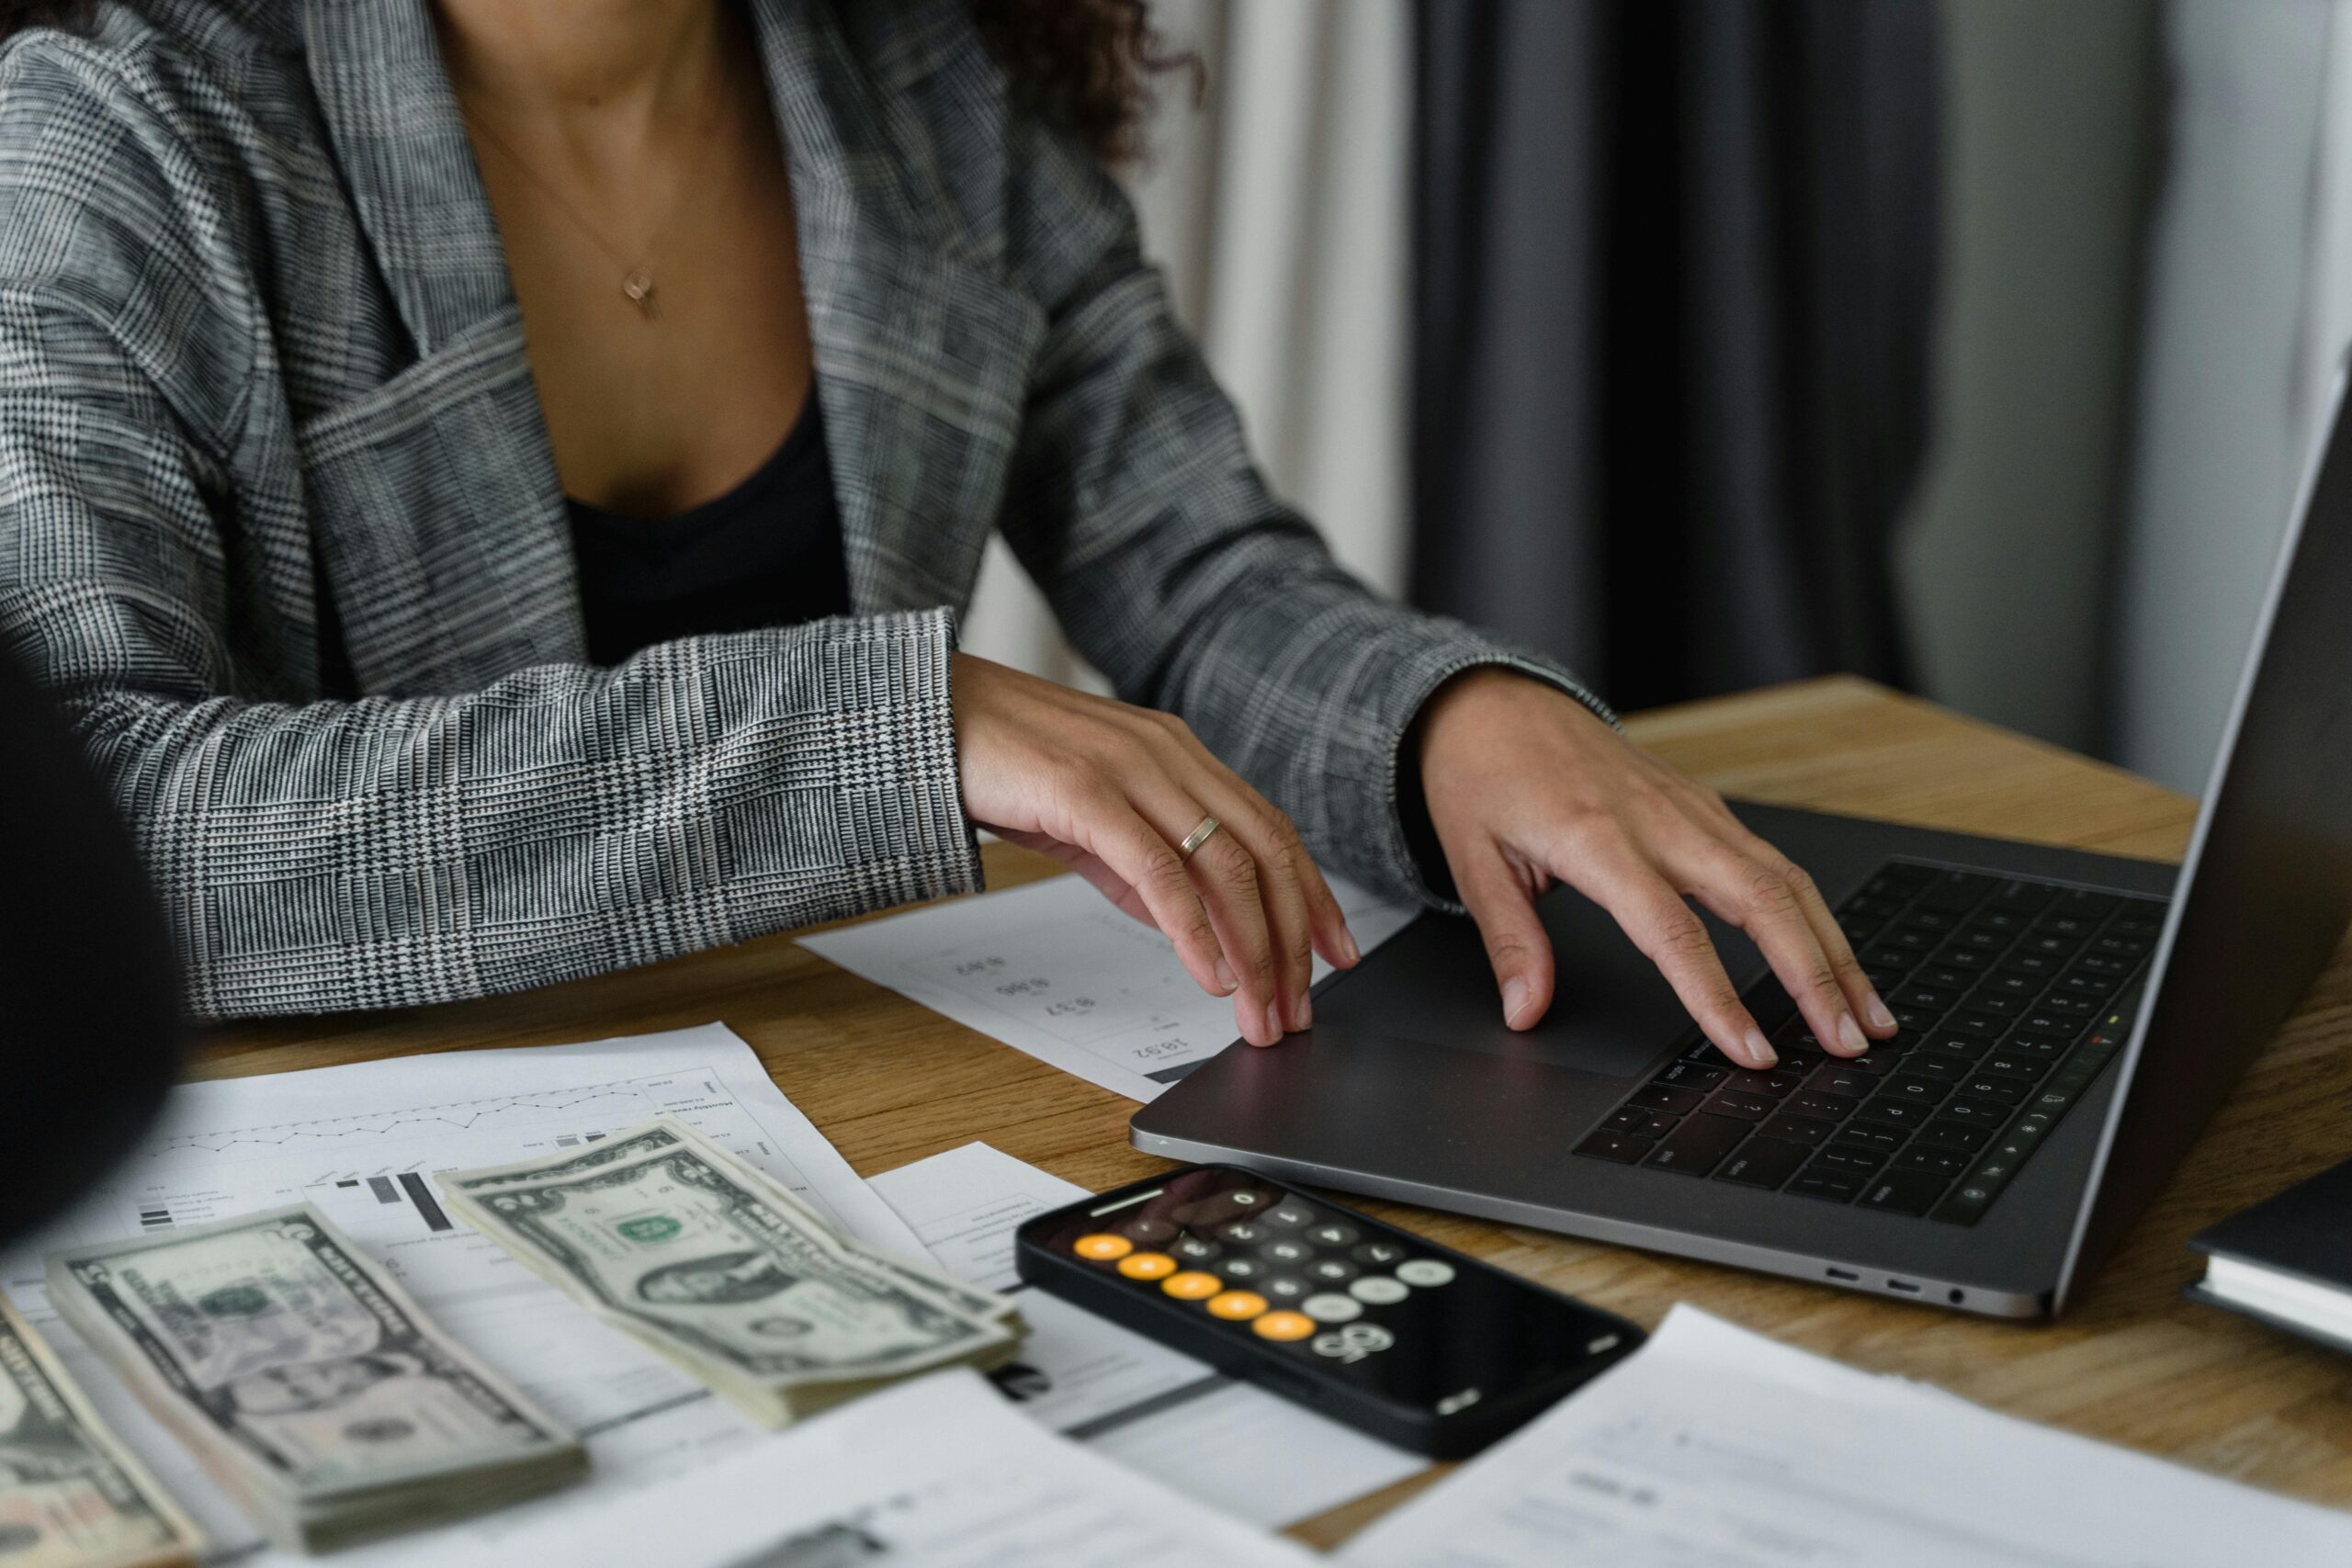 A woman budgeting at a desk